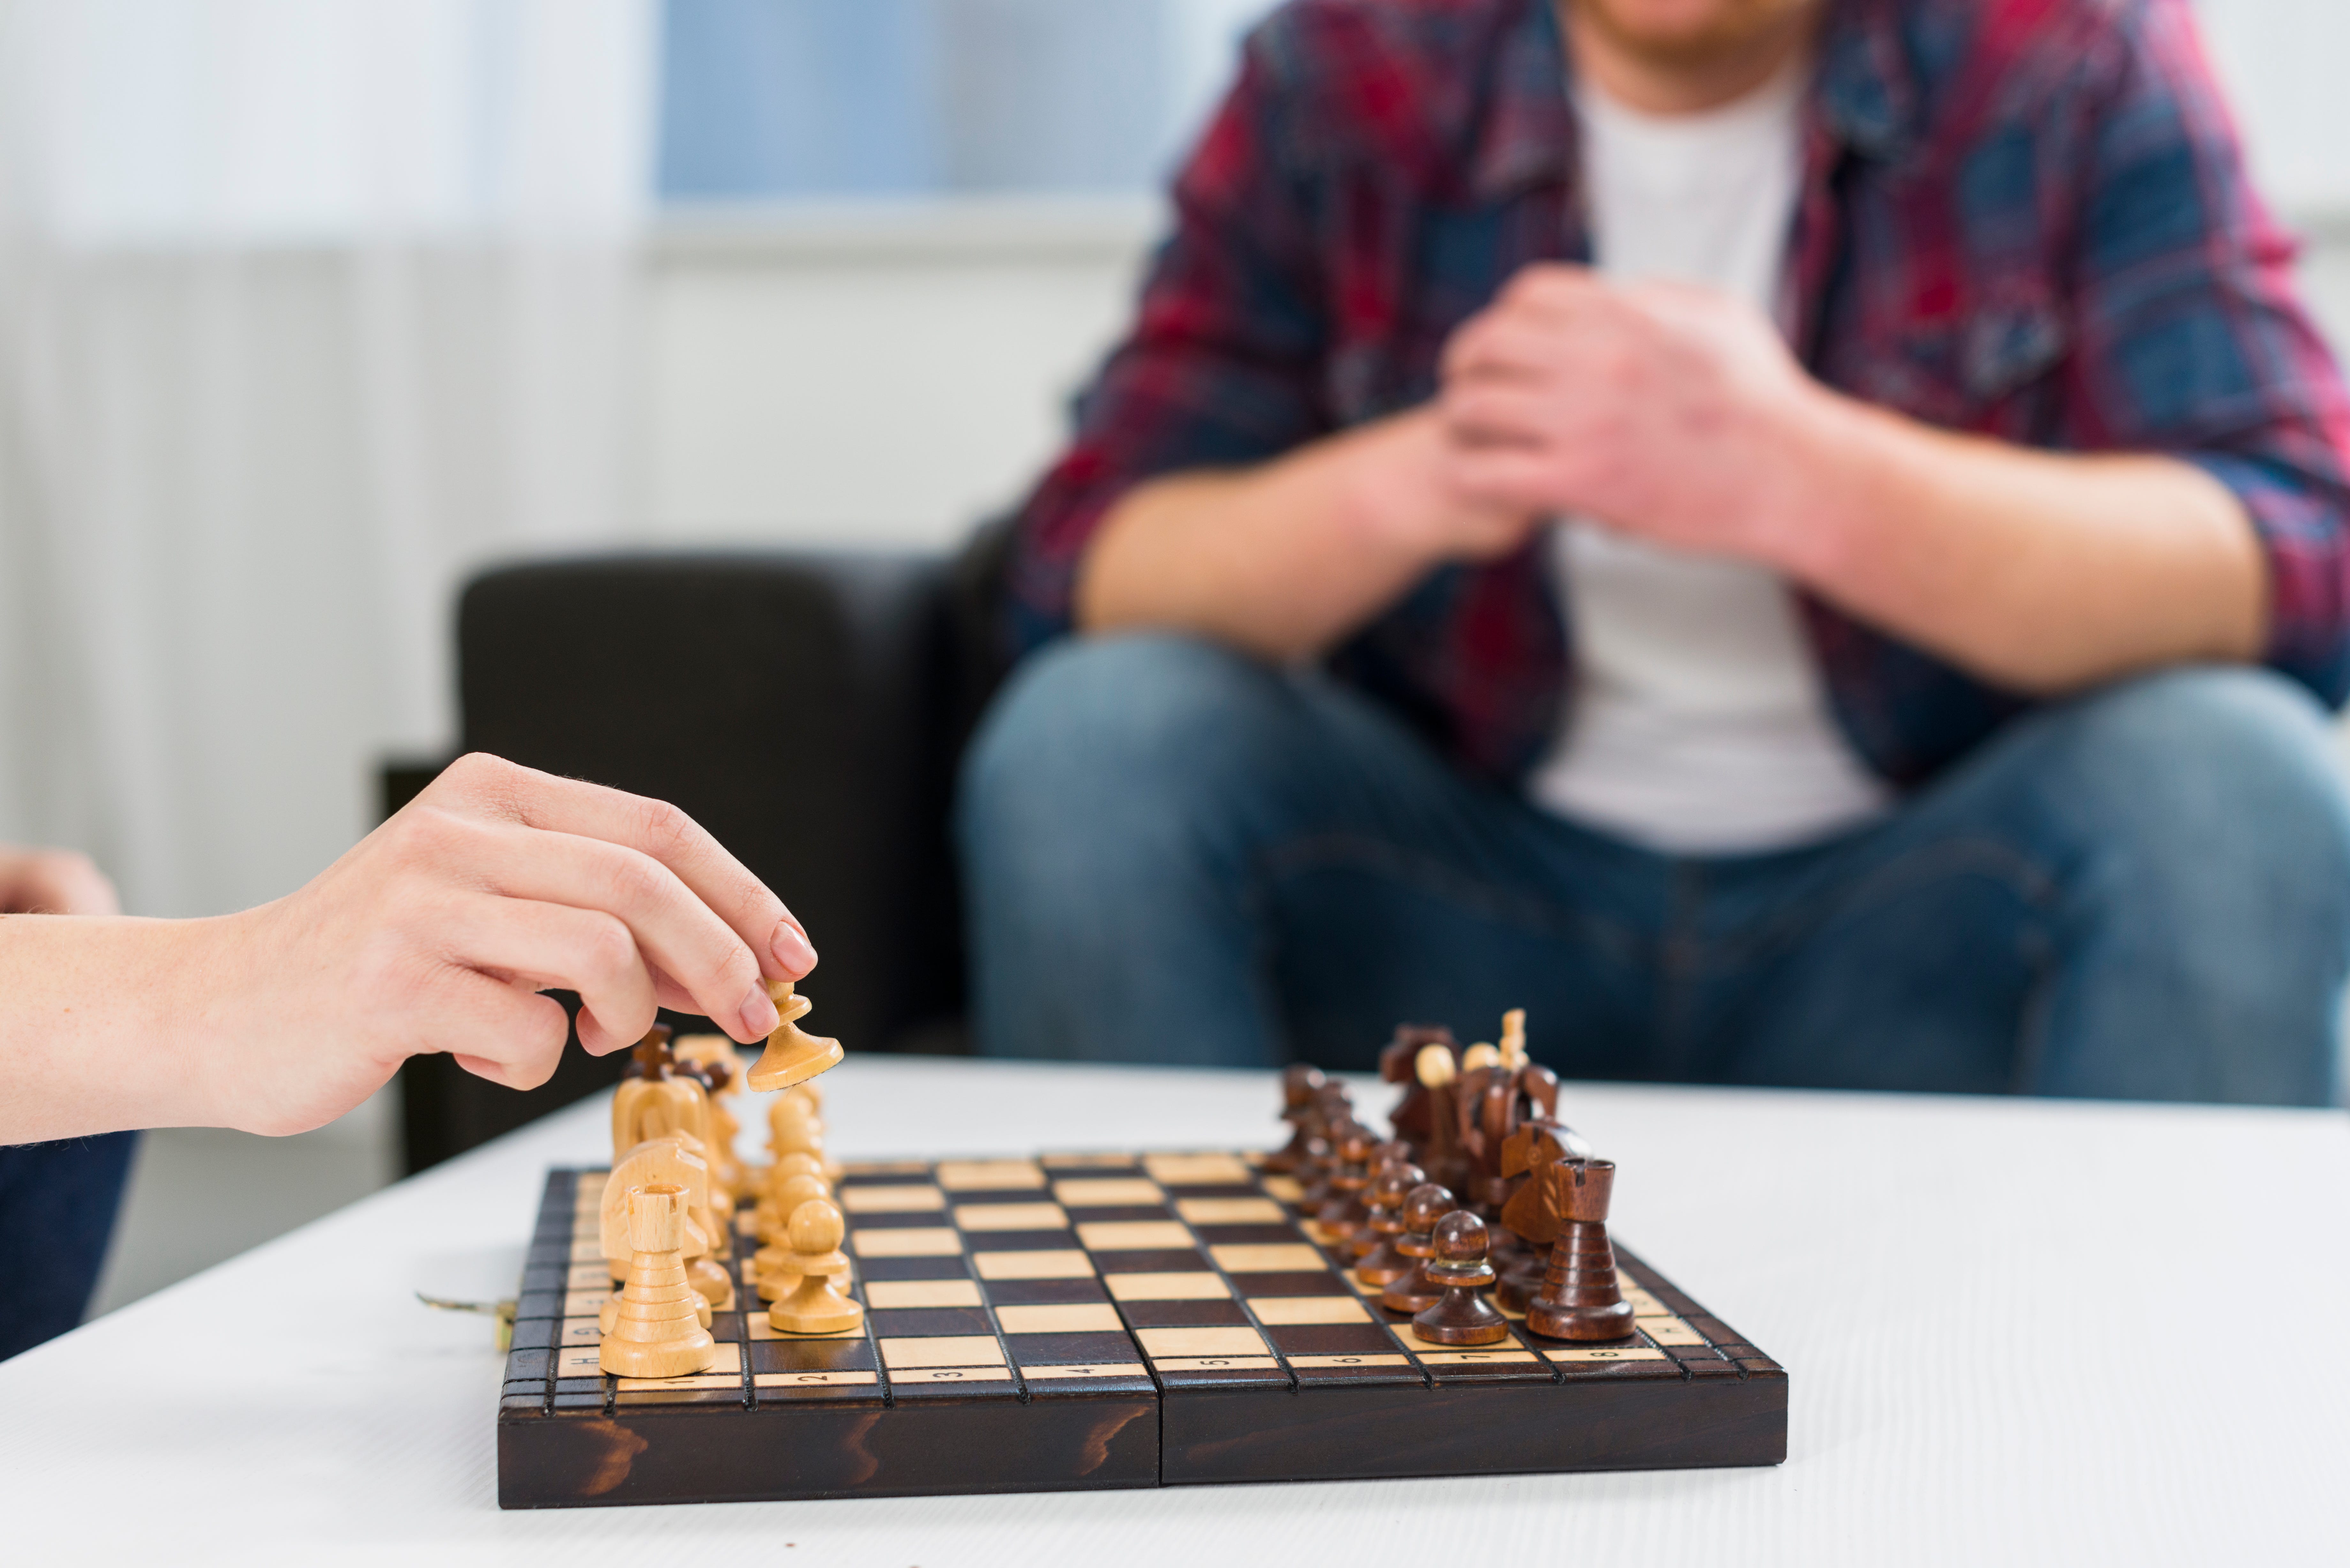 Is Playing Chess Halal / Bring the Kids to the Downtown Library and Let Them Play ... / These reports as to whether playing chess itself halal or haram, and this is an issue on which there is no scholarly consensus.